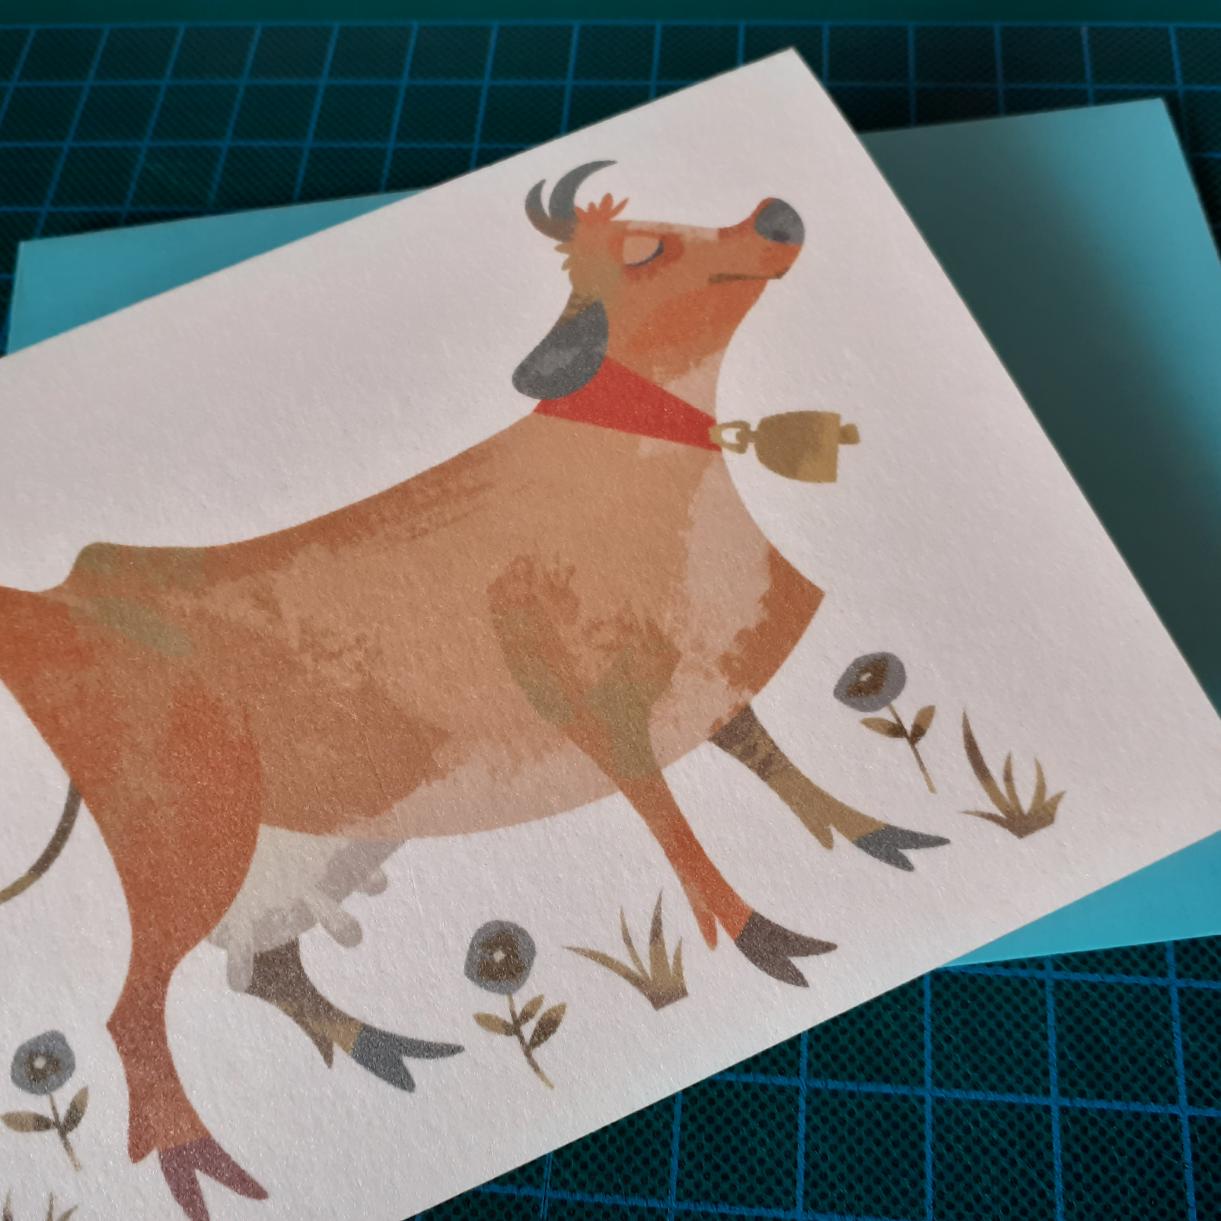 b;ack greeting card with cow illustration